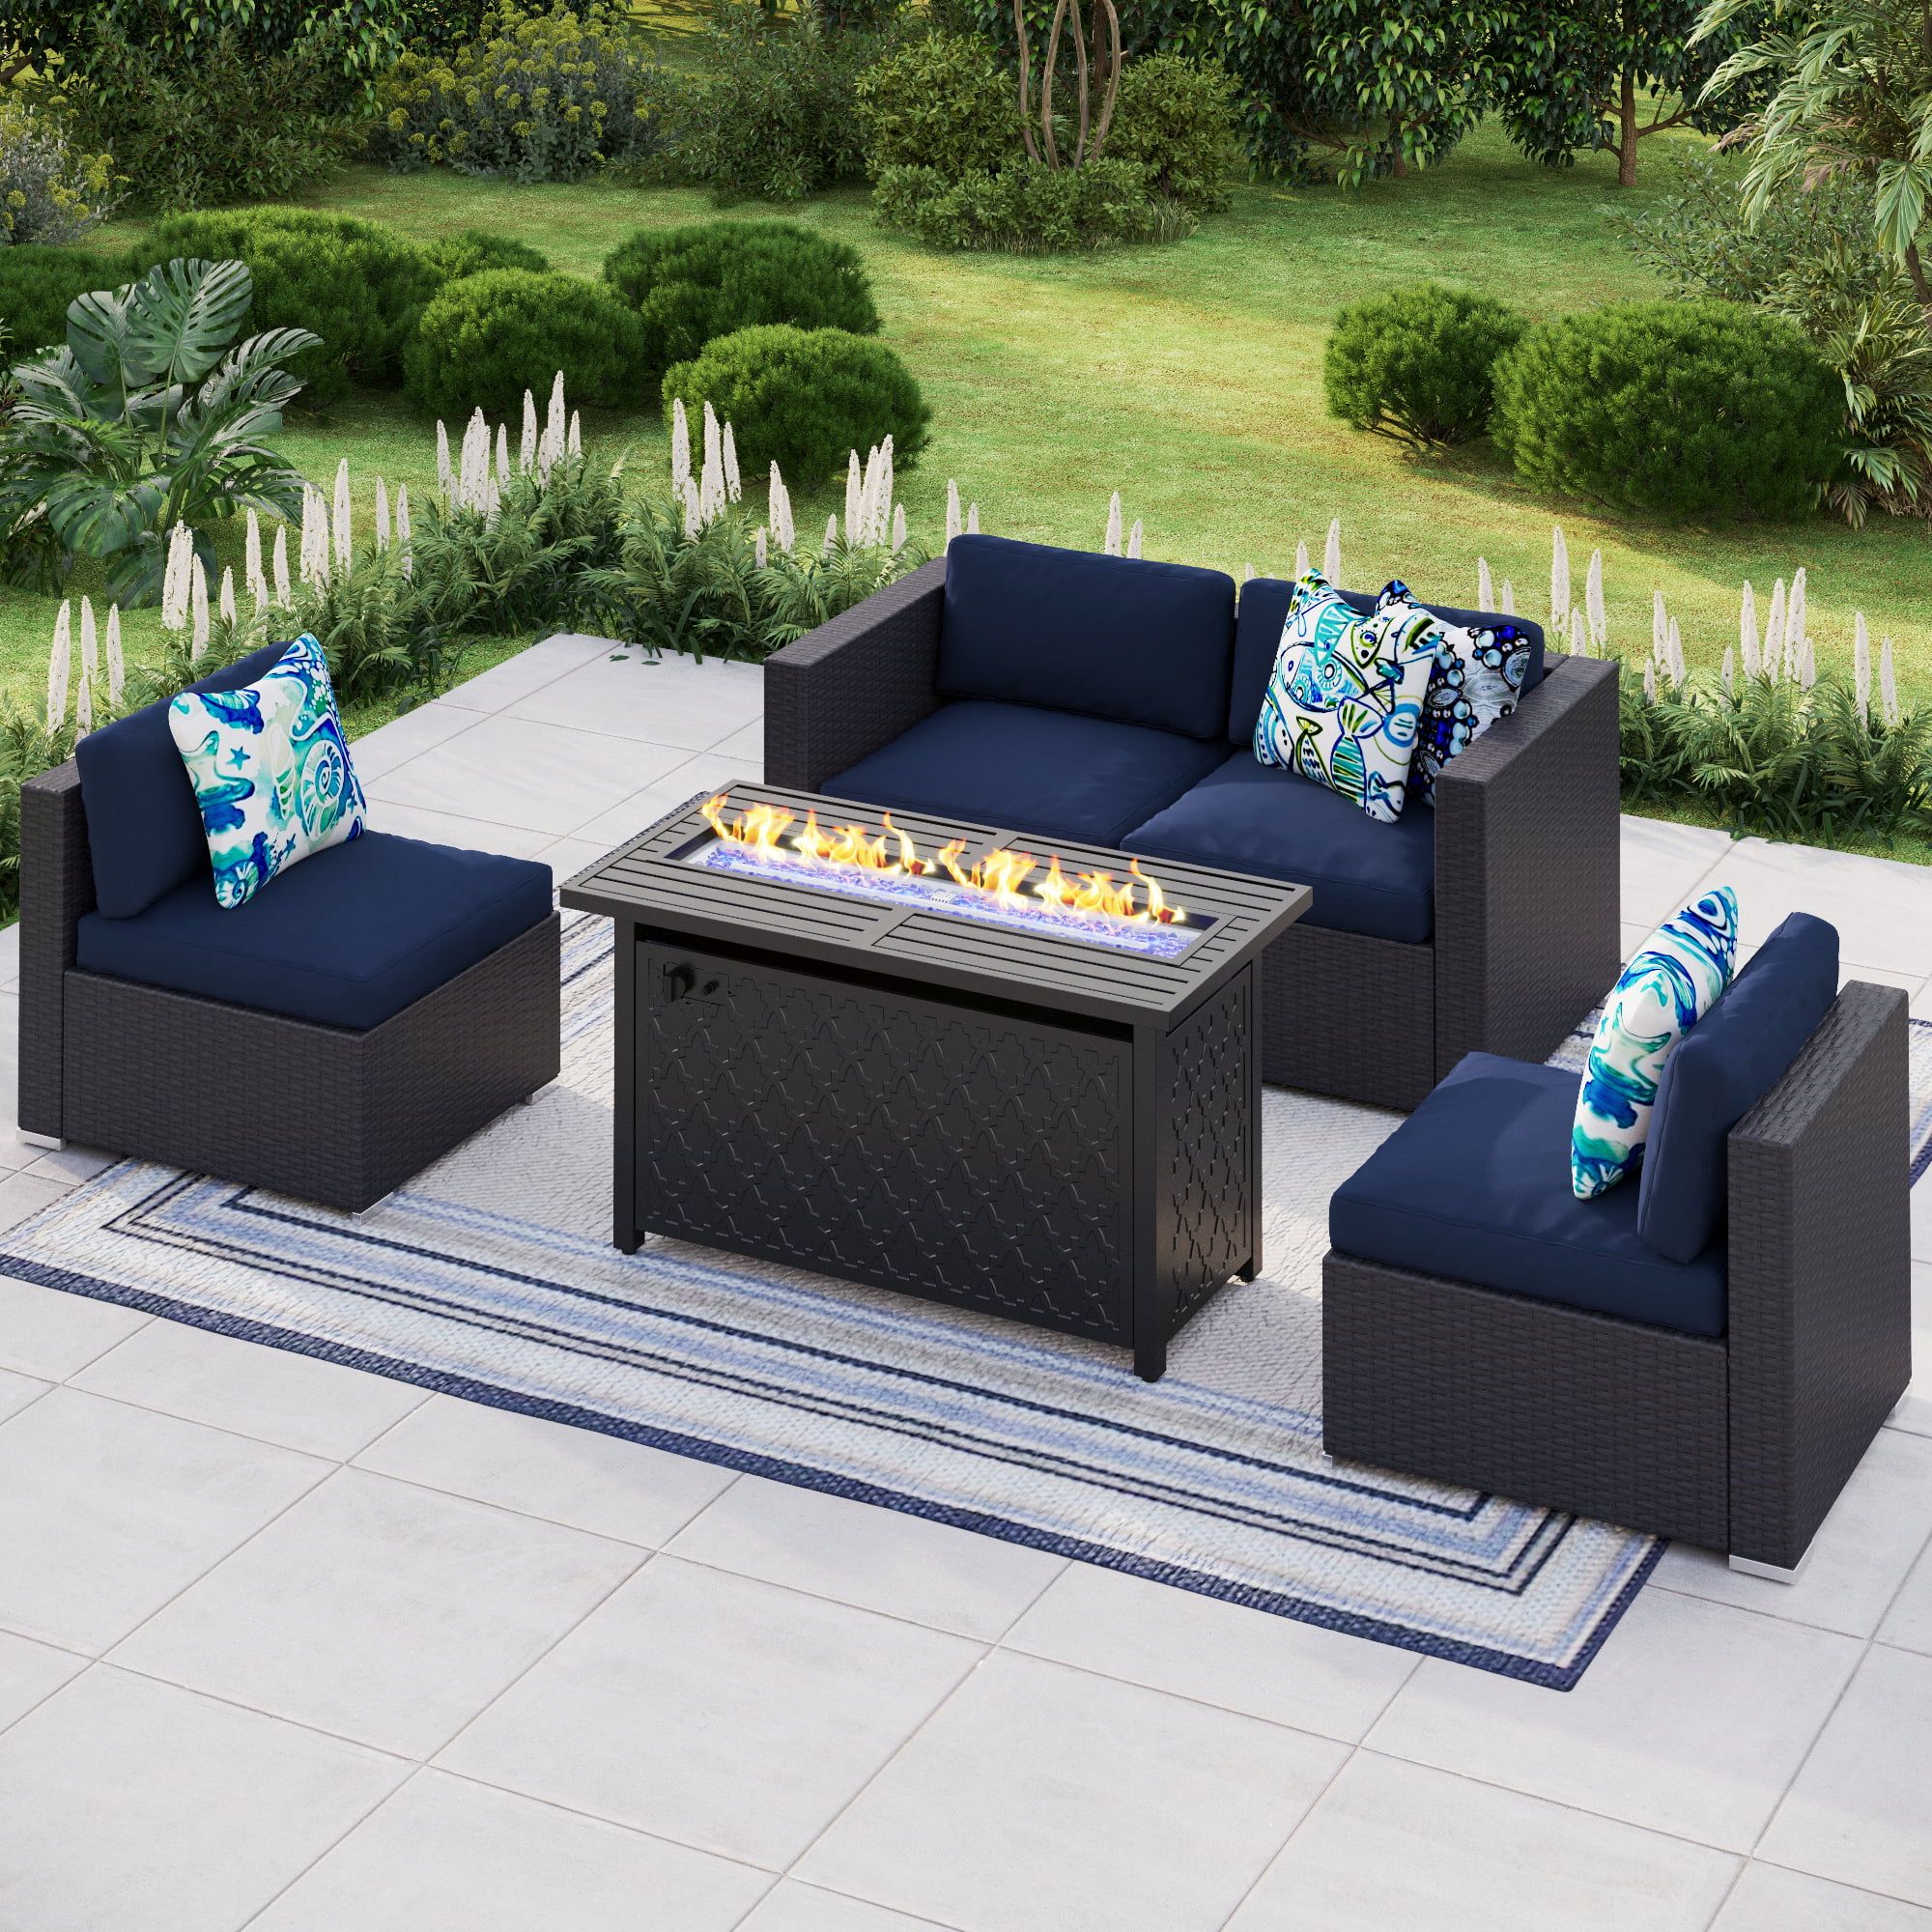 Fire Pit Table Wicker Sectional Sofa Conversation Set Inside Recent Mf Studio 5pcs Gas Fire Pit Table Set, 4pcs Patio Conversation Sets With 45  Inch Rectangular Outdoor Firepits, Bluel Fire Glass And Lid For Free, Black  – Walmart (View 9 of 15)